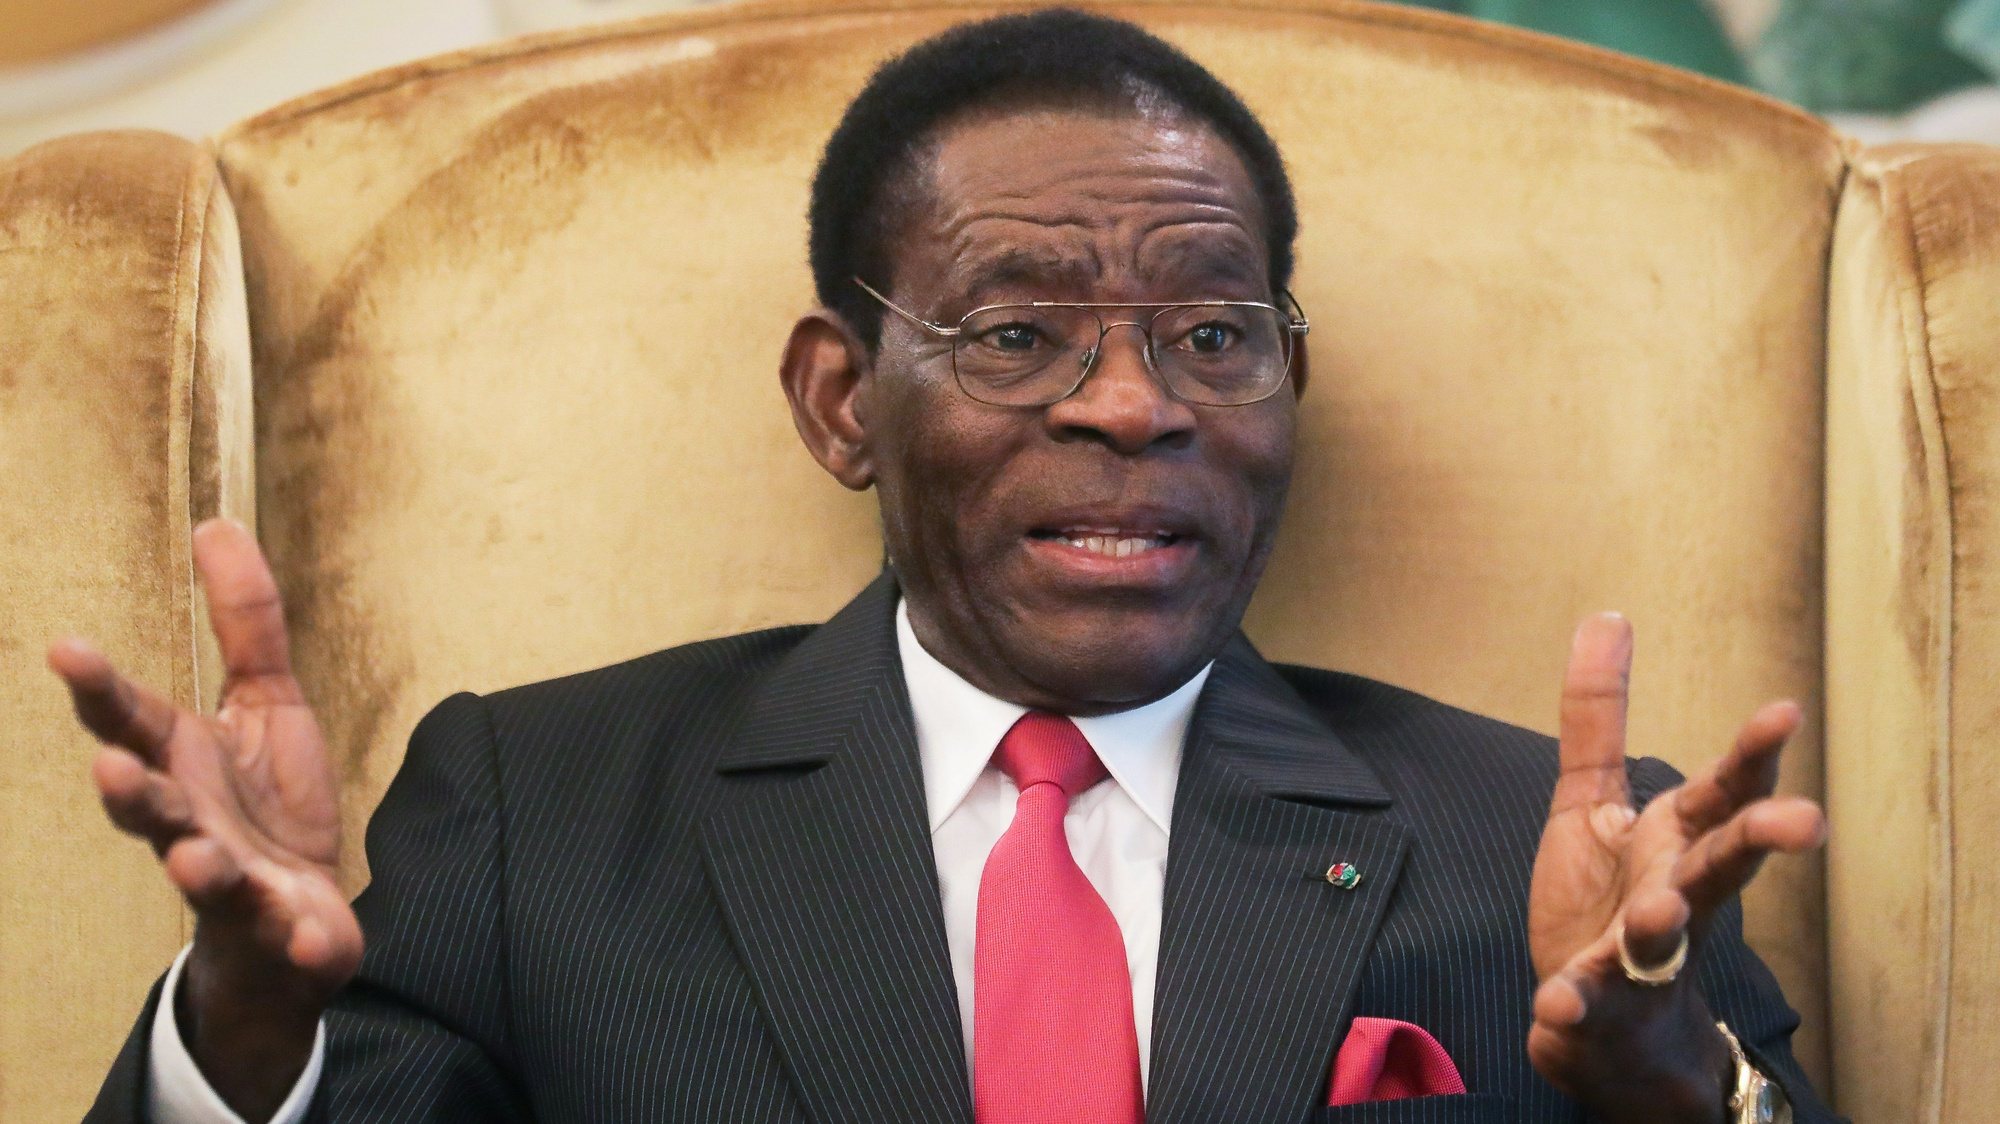 epa09061239 (FILE) - The President of Equatorial Guinea Teodoro Obiang speaks during a meeting with members from a delegation from the Community of Portuguese Speaking Countries (CPLP), responsible for the observations of the Legislative and Municipal Elections, at the Presidential Palace in Malabo, Equatorial Guinea, 10 November 2017 (reissued 08 March 2021). Equatorial Guinea&#039;s main city Bata has been rocked by several explosions on 07 March, President Teodoro Obiang Nguema Mbasogo said in an official statement, blaming negligence and carelessness of a unit in charge of explosives at a military base.  EPA/MARIO CRUZ *** Local Caption *** 54161279